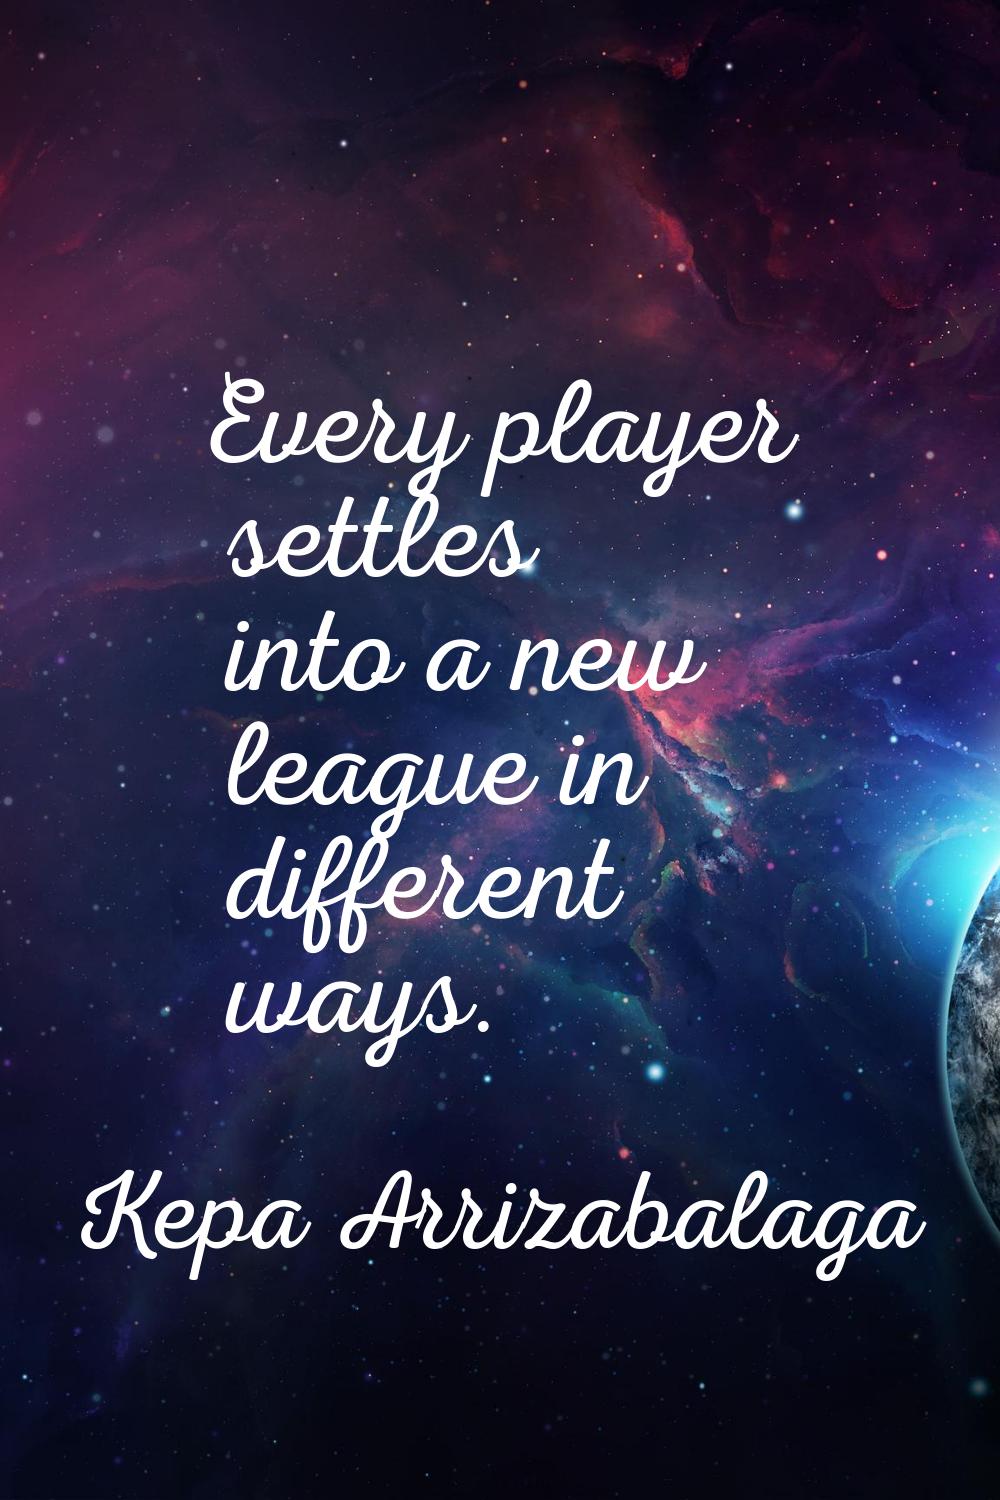 Every player settles into a new league in different ways.